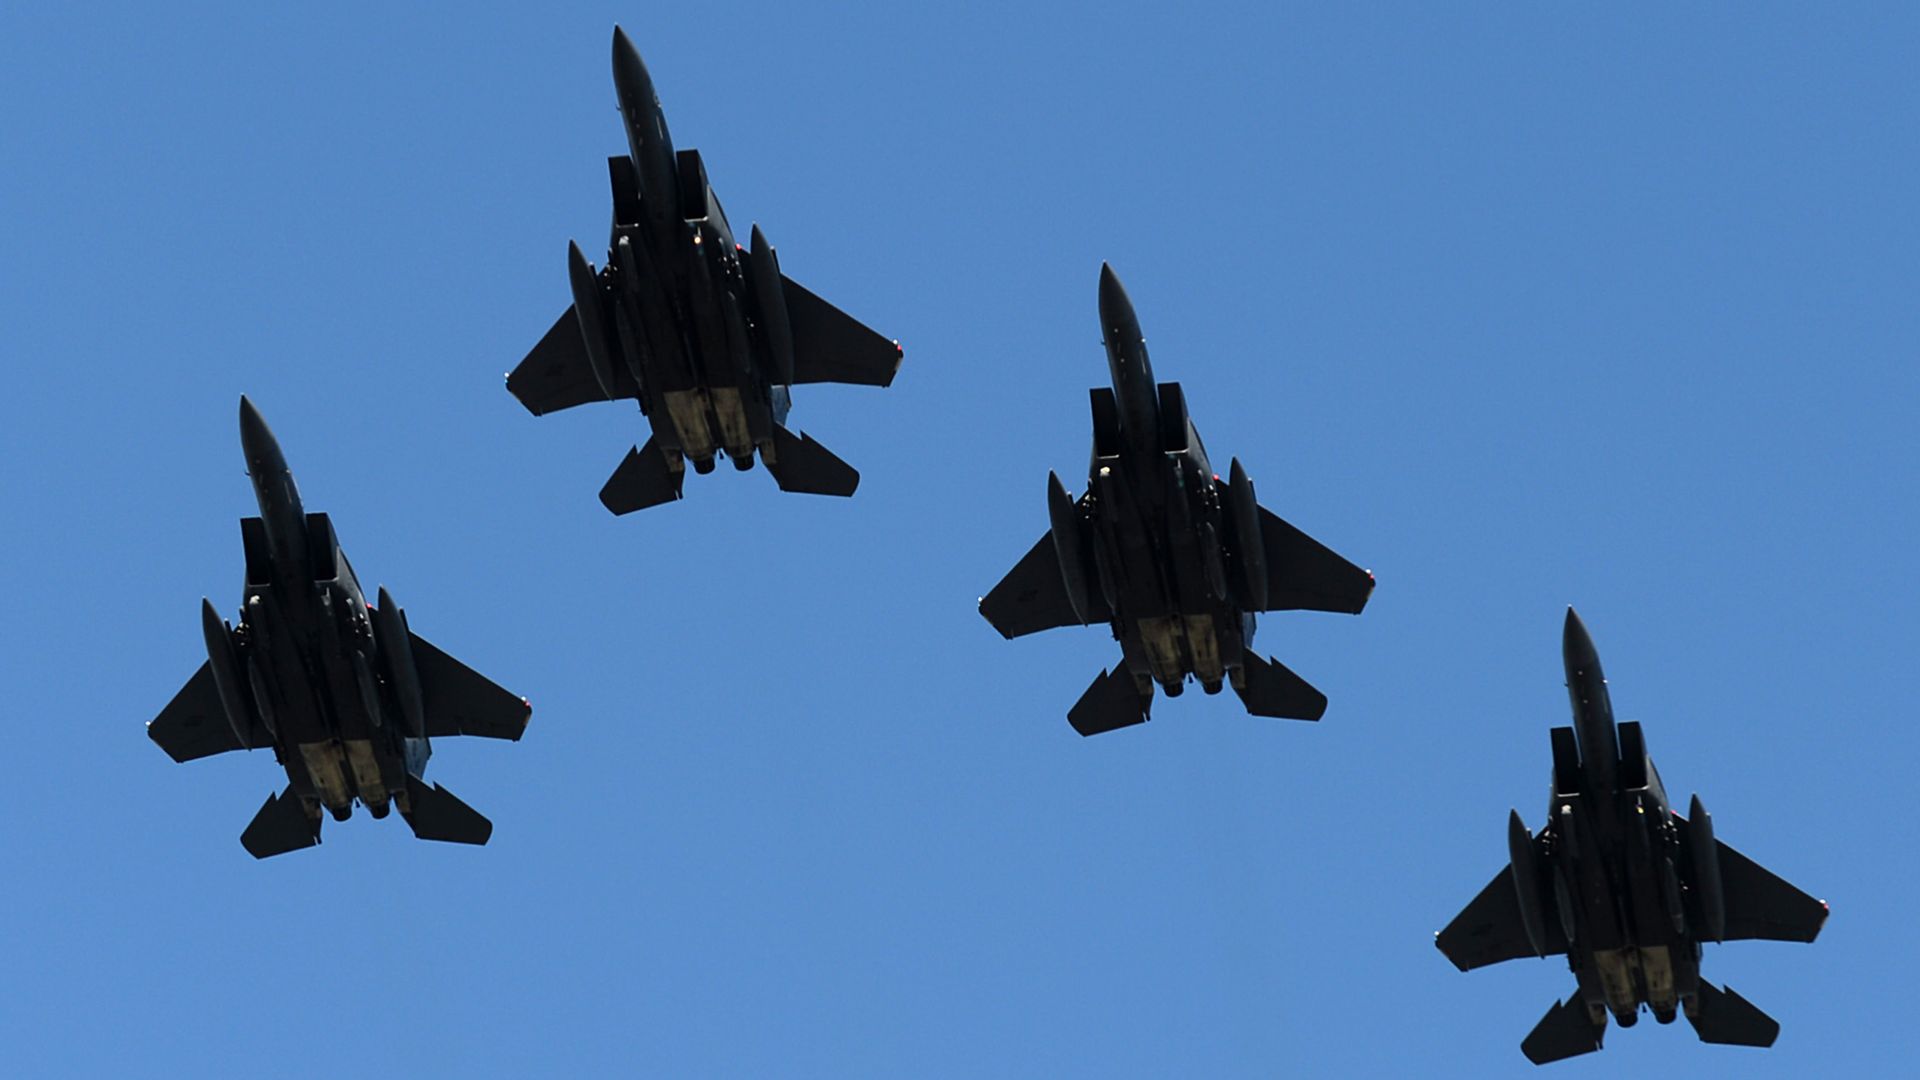 Four F-15's from Seymour Johnson AFB fly over Charlotte Motor Speedway during the national anthem on Sunday, May 28, 2017. (Jeff Siner/Charlotte Observer/Tribune News Service via Getty Images)